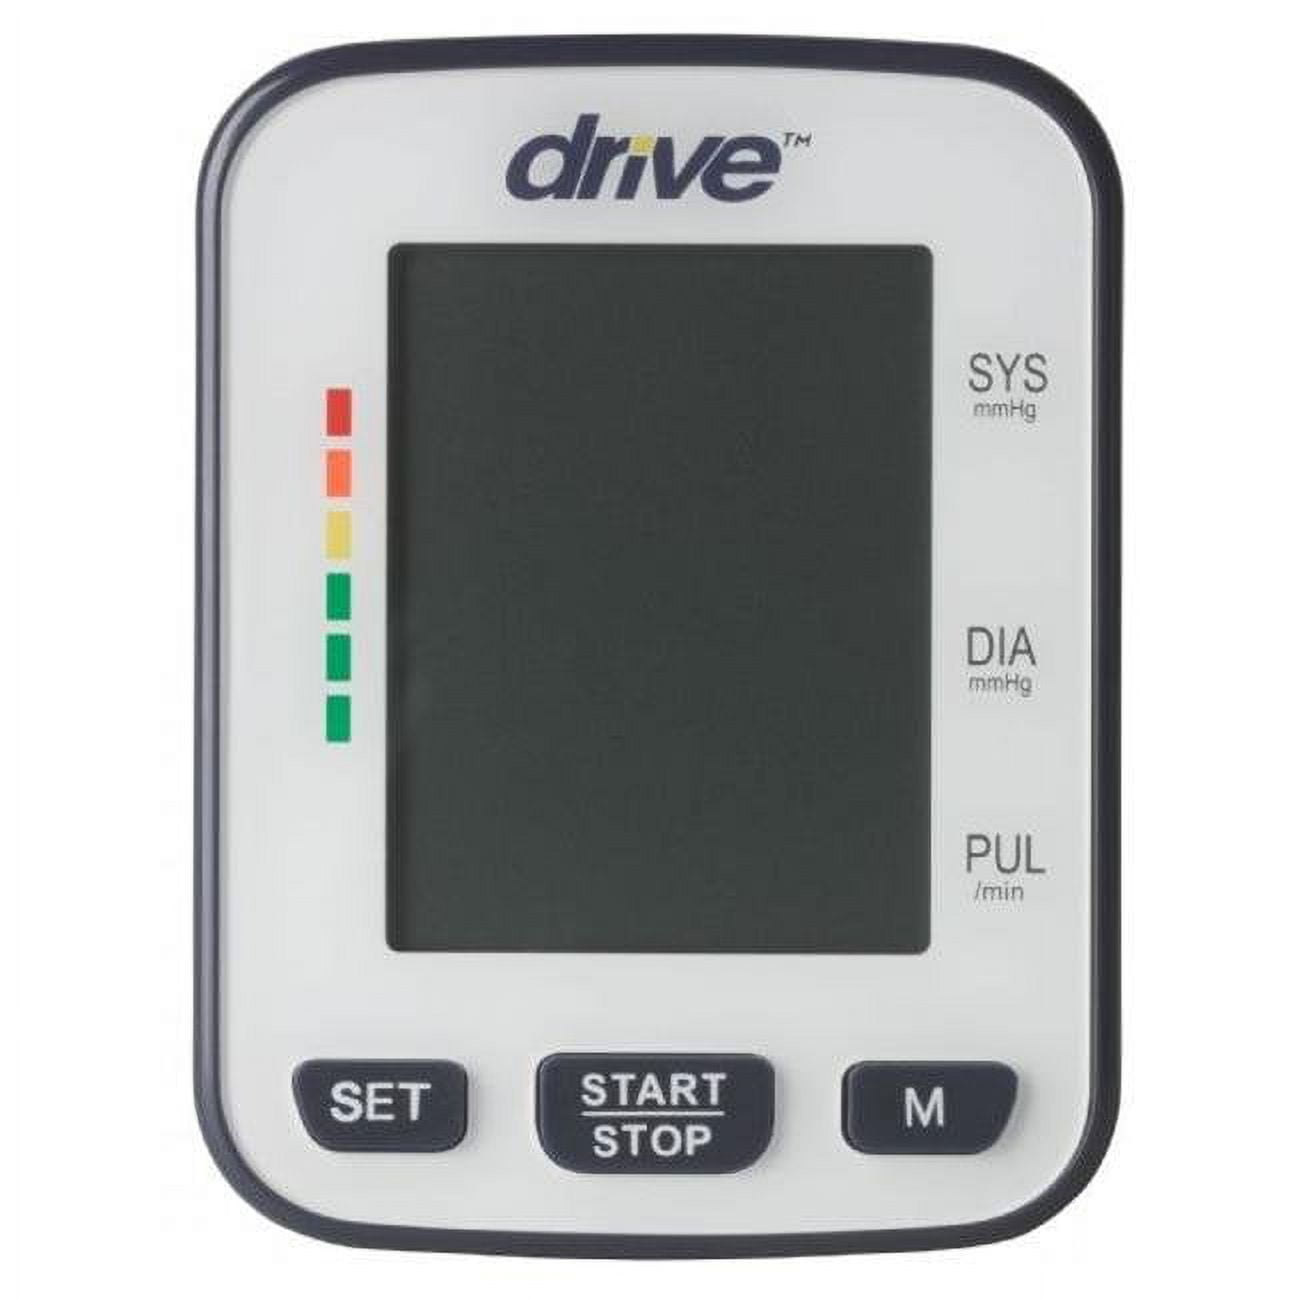 Drivemedical Bp3400 Automatic Deluxe Blood Pressure Monitor, Upper Arm